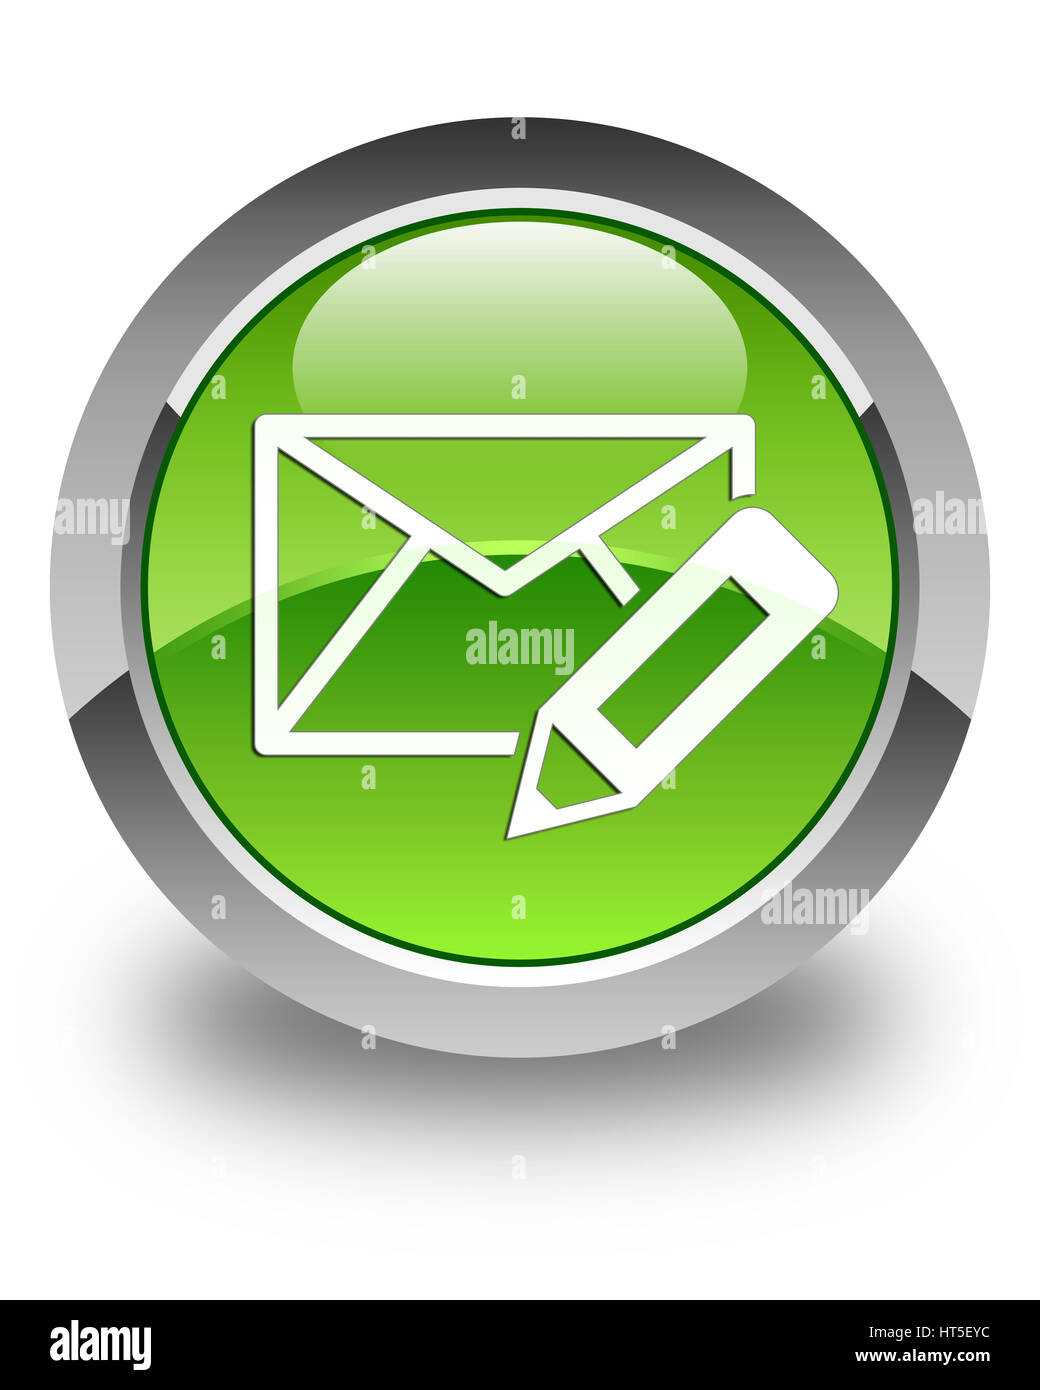 Edit email icon isolated on glossy green round button abstract illustration Stock Photo